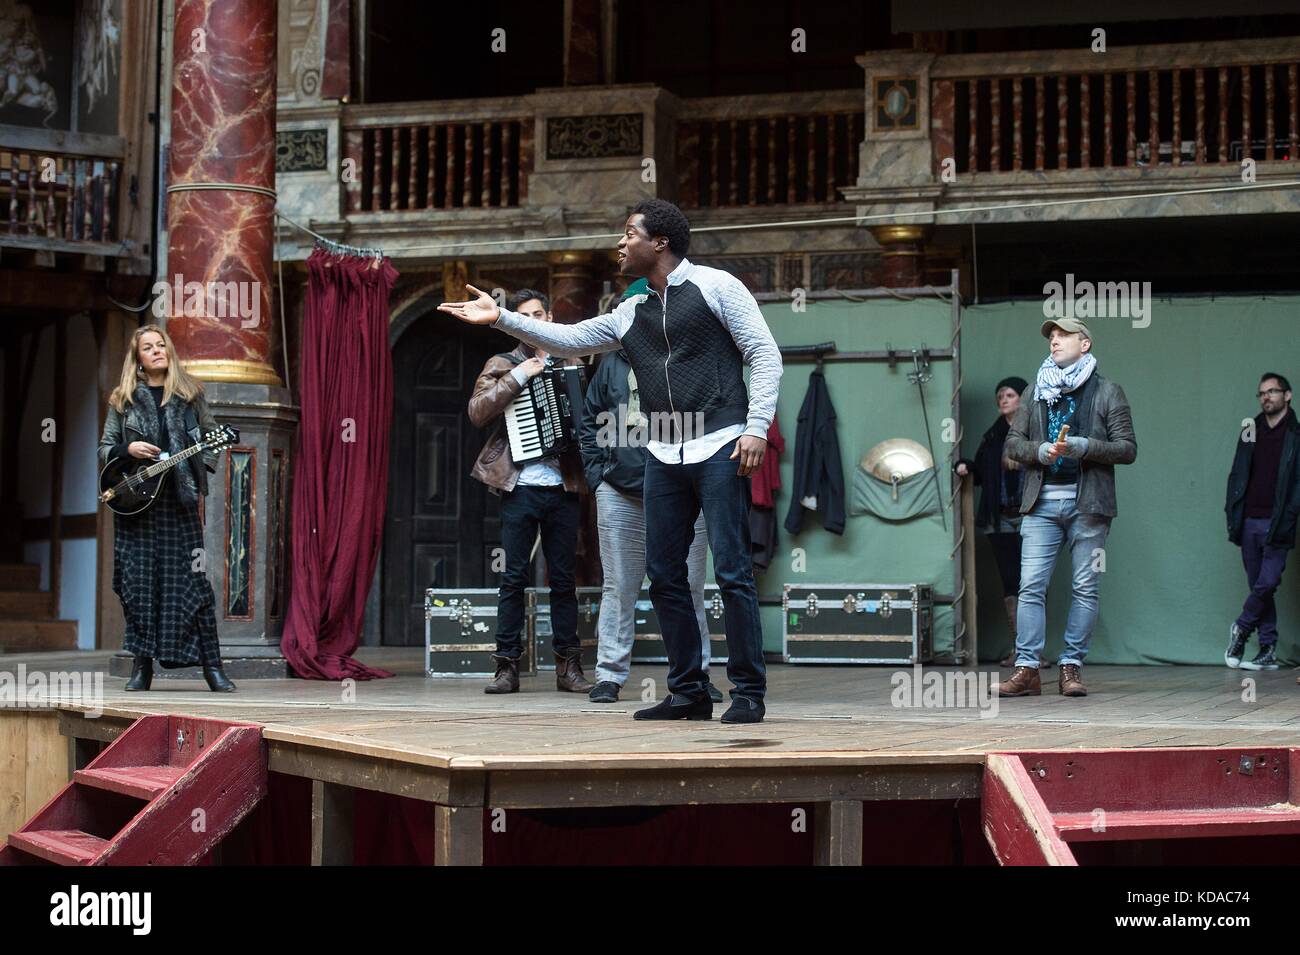 The cast of Hamlet perform scenes from the play for U.S. President Barack Obama during his visit to the Shakespeare Globe Theatre April 23, 2016 in London, England. Stock Photo